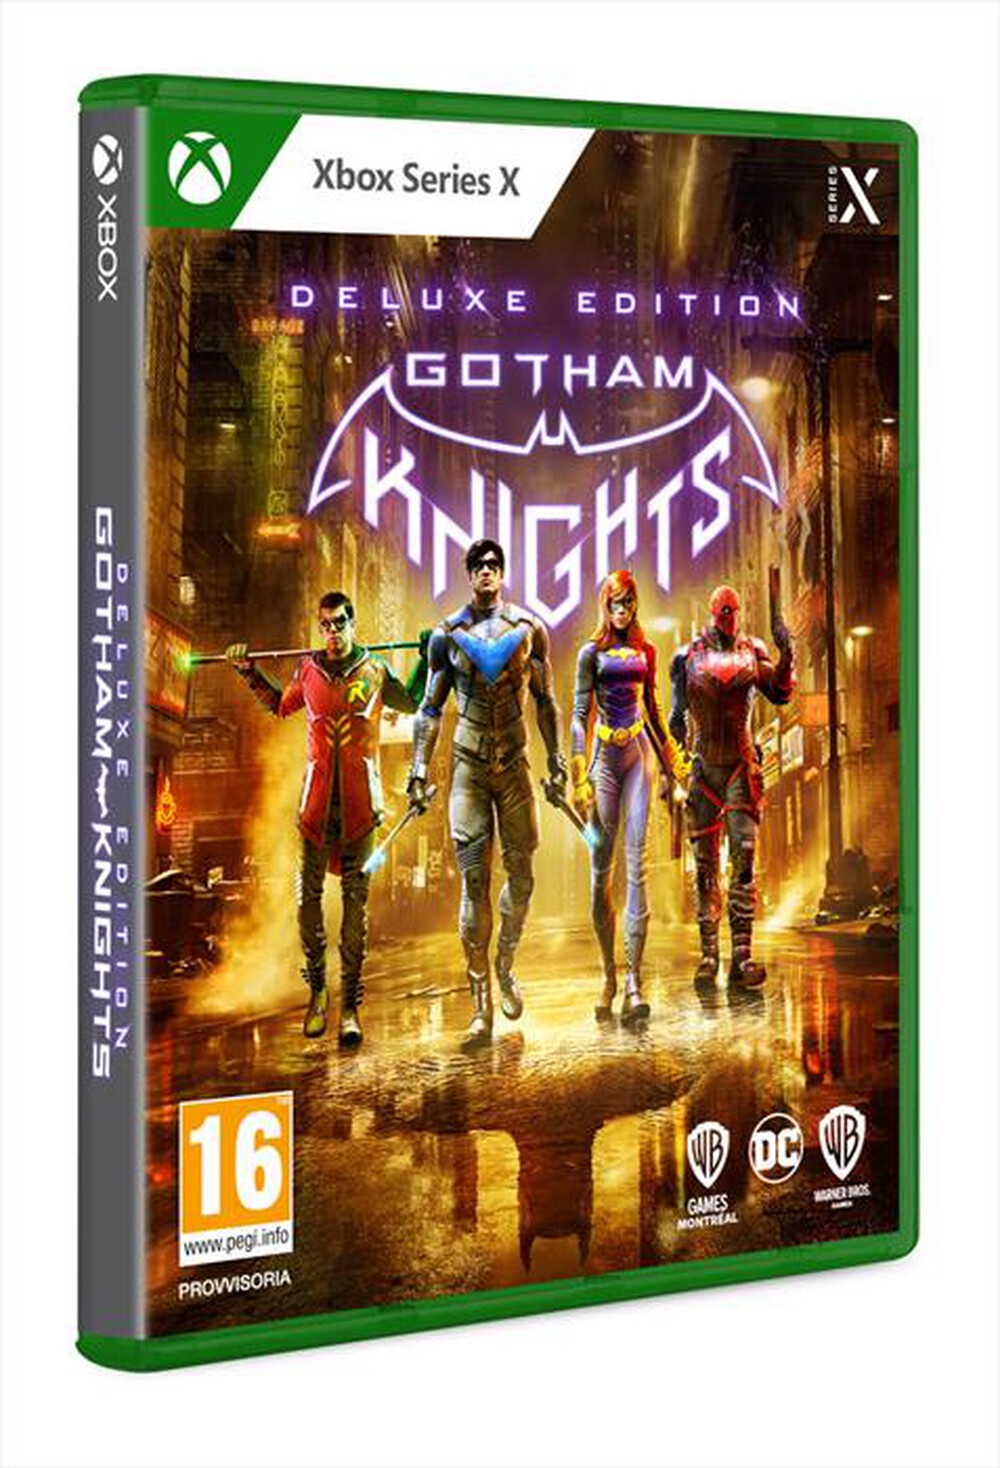 "WARNER GAMES - GOTHAM KNIGHTS DELUXE EDITION (XBSX)"